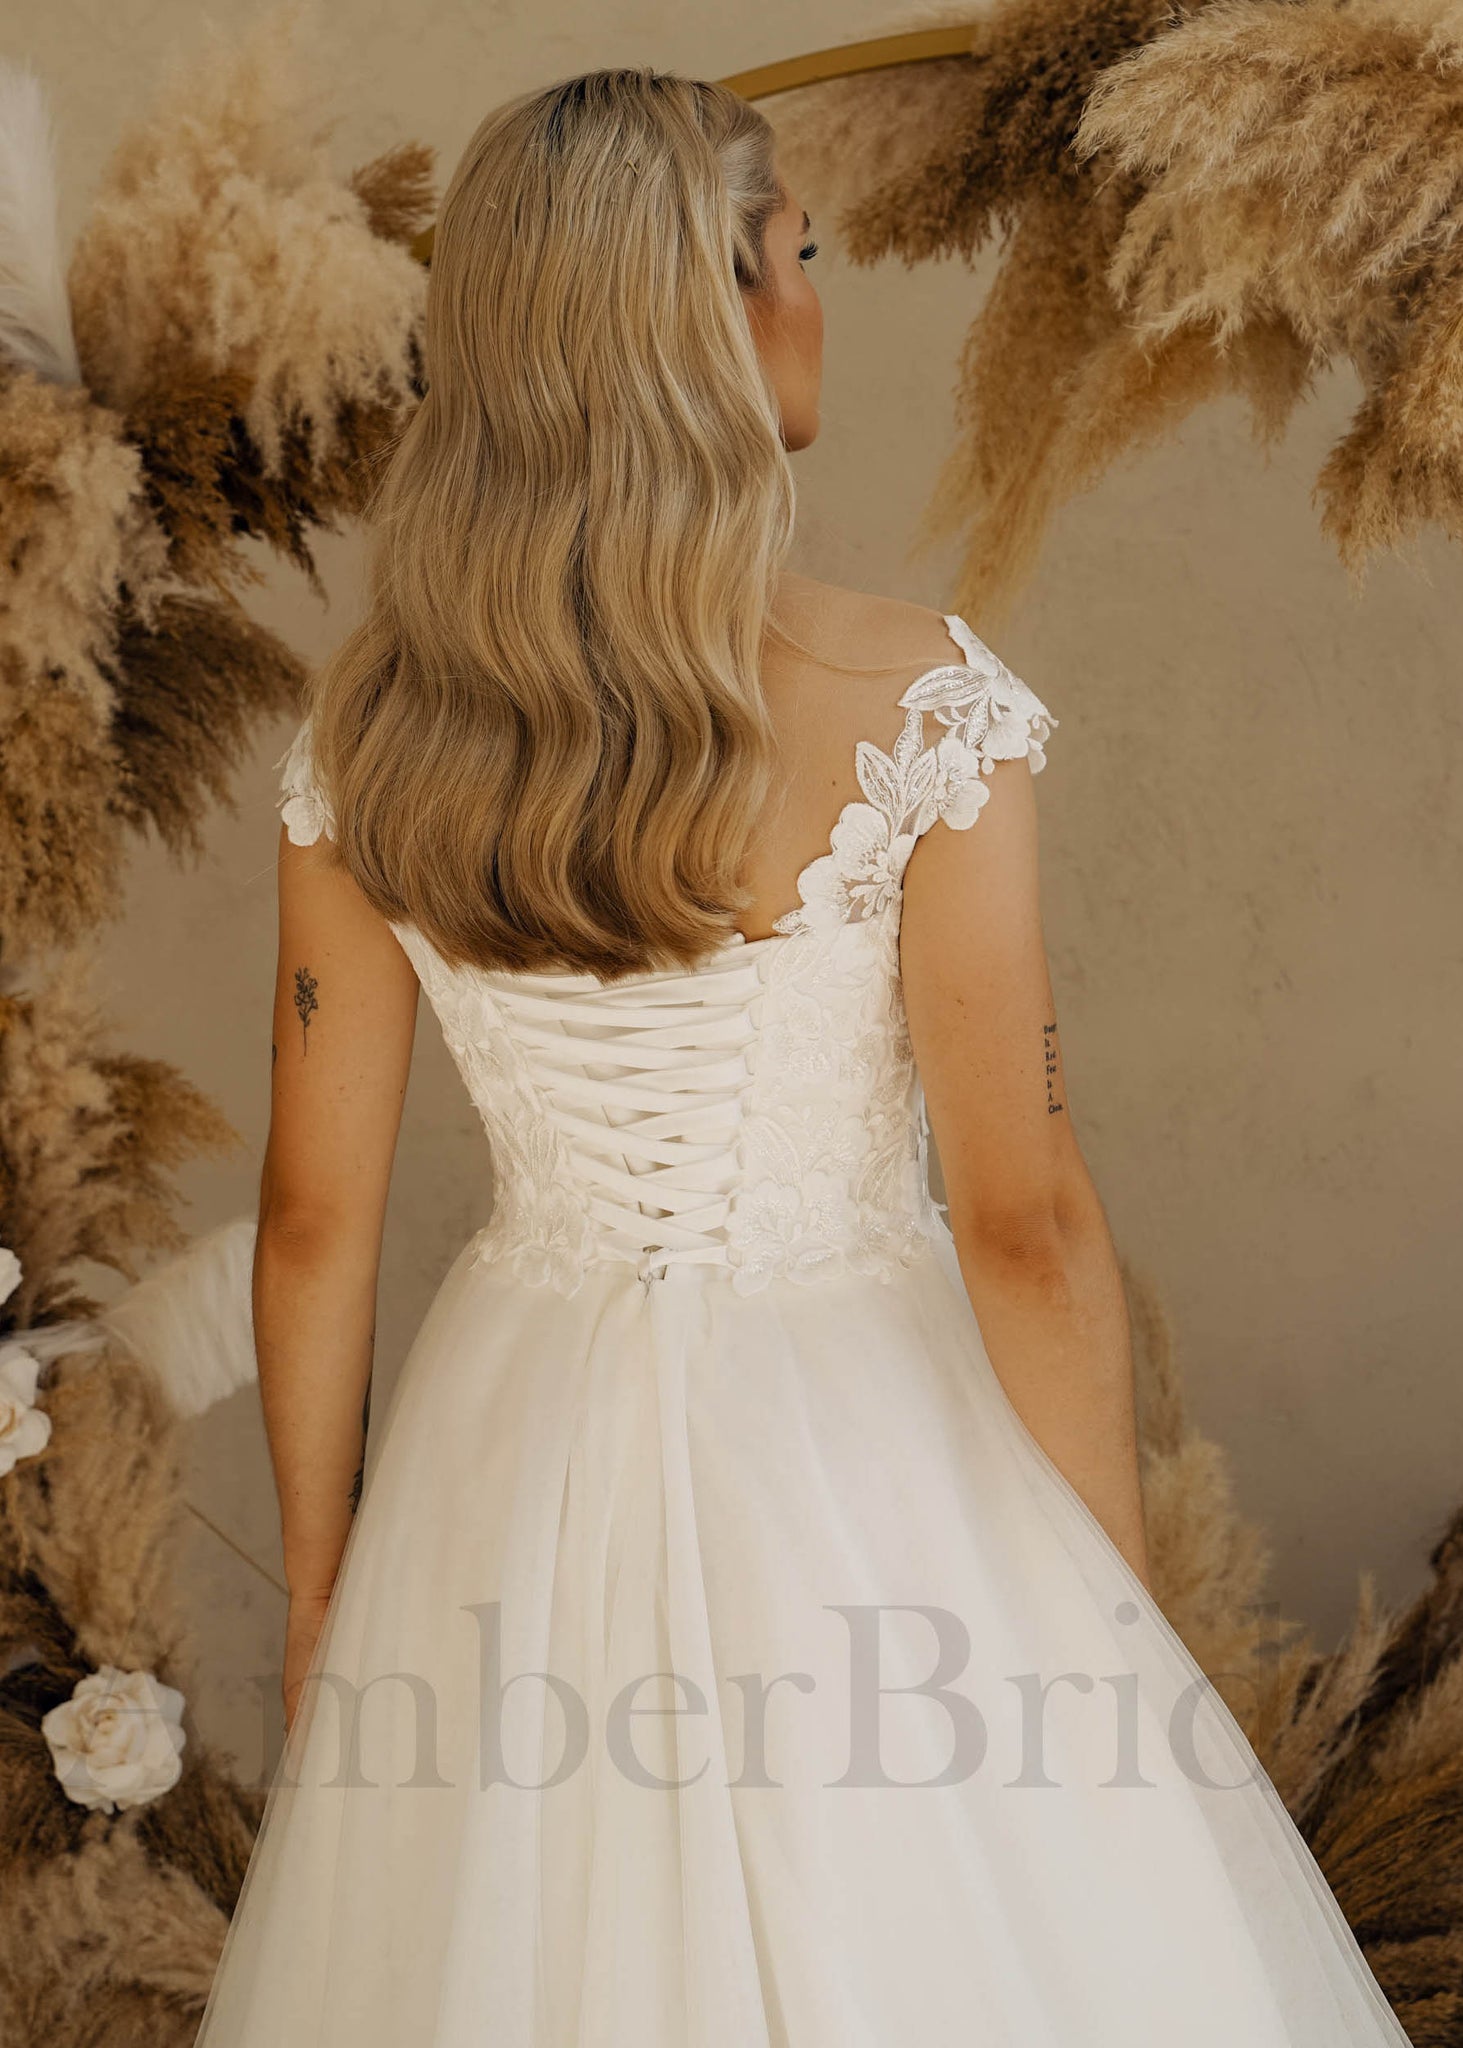 Rustic A Line Tulle Wedding Dress with Flowers and Illusion Design